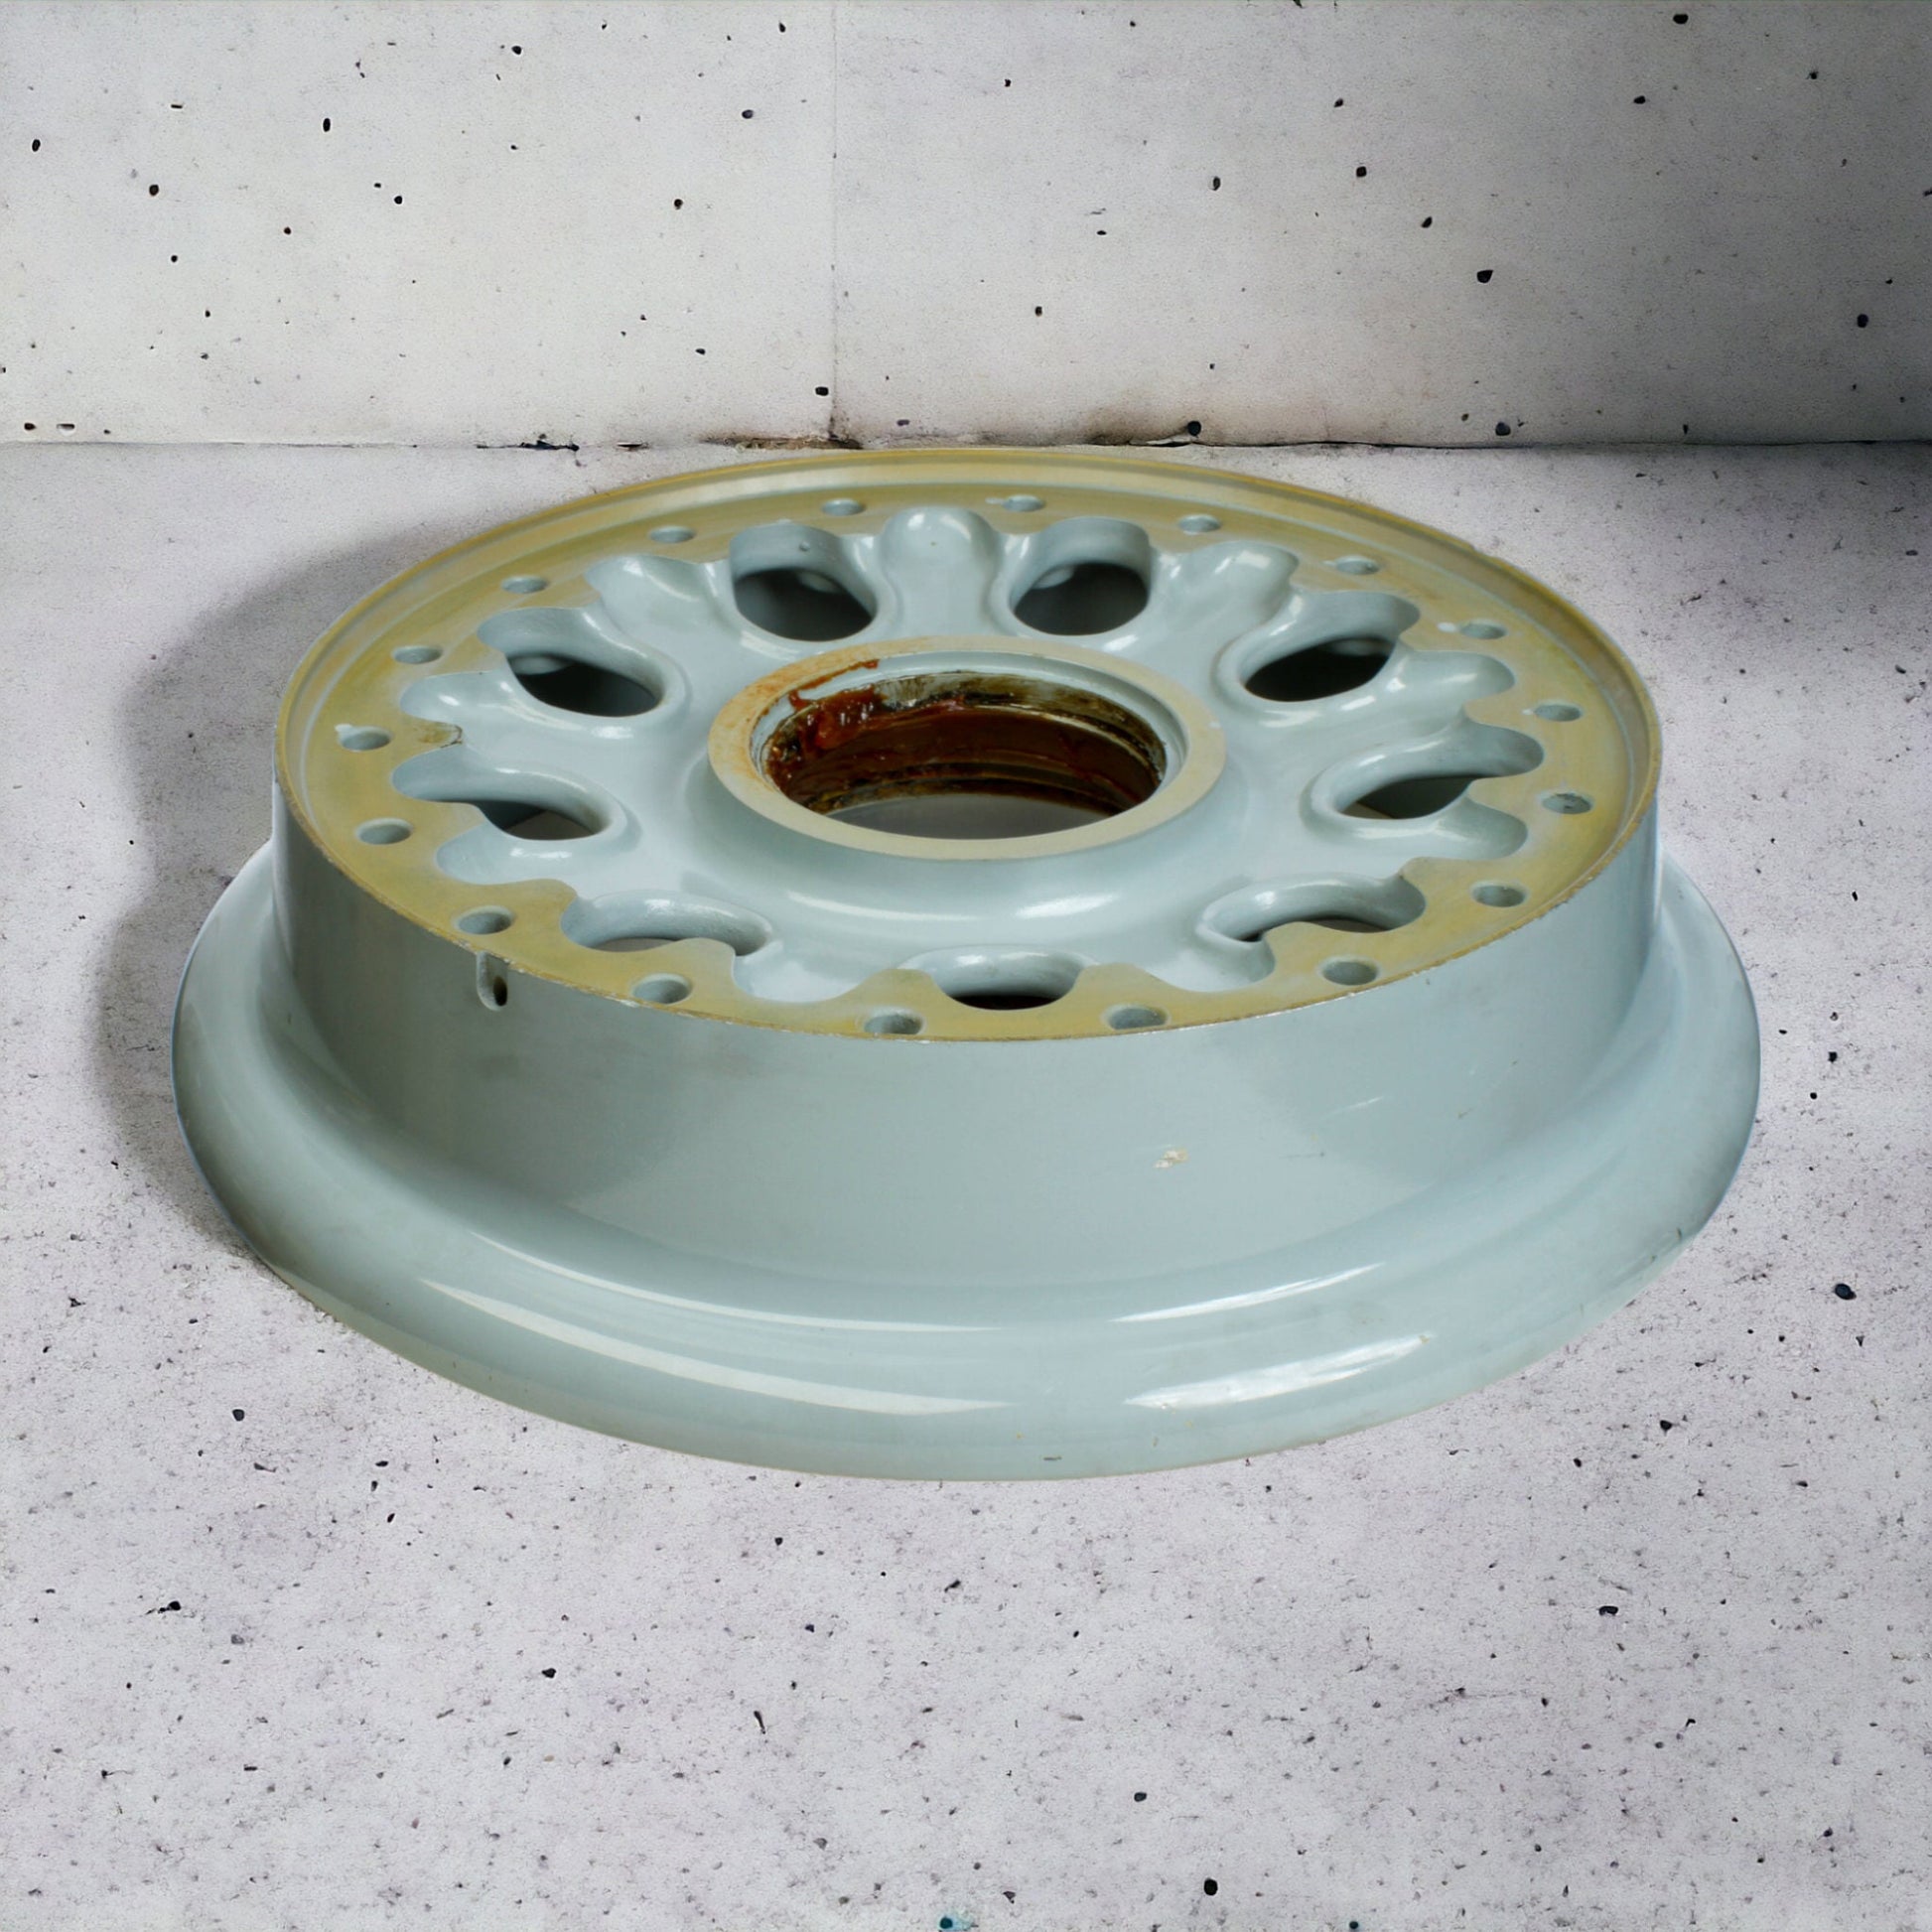 Boeing 737-300 Aircraft Main Wheel Ex EgyptAir Upcycled Table Coffee Table